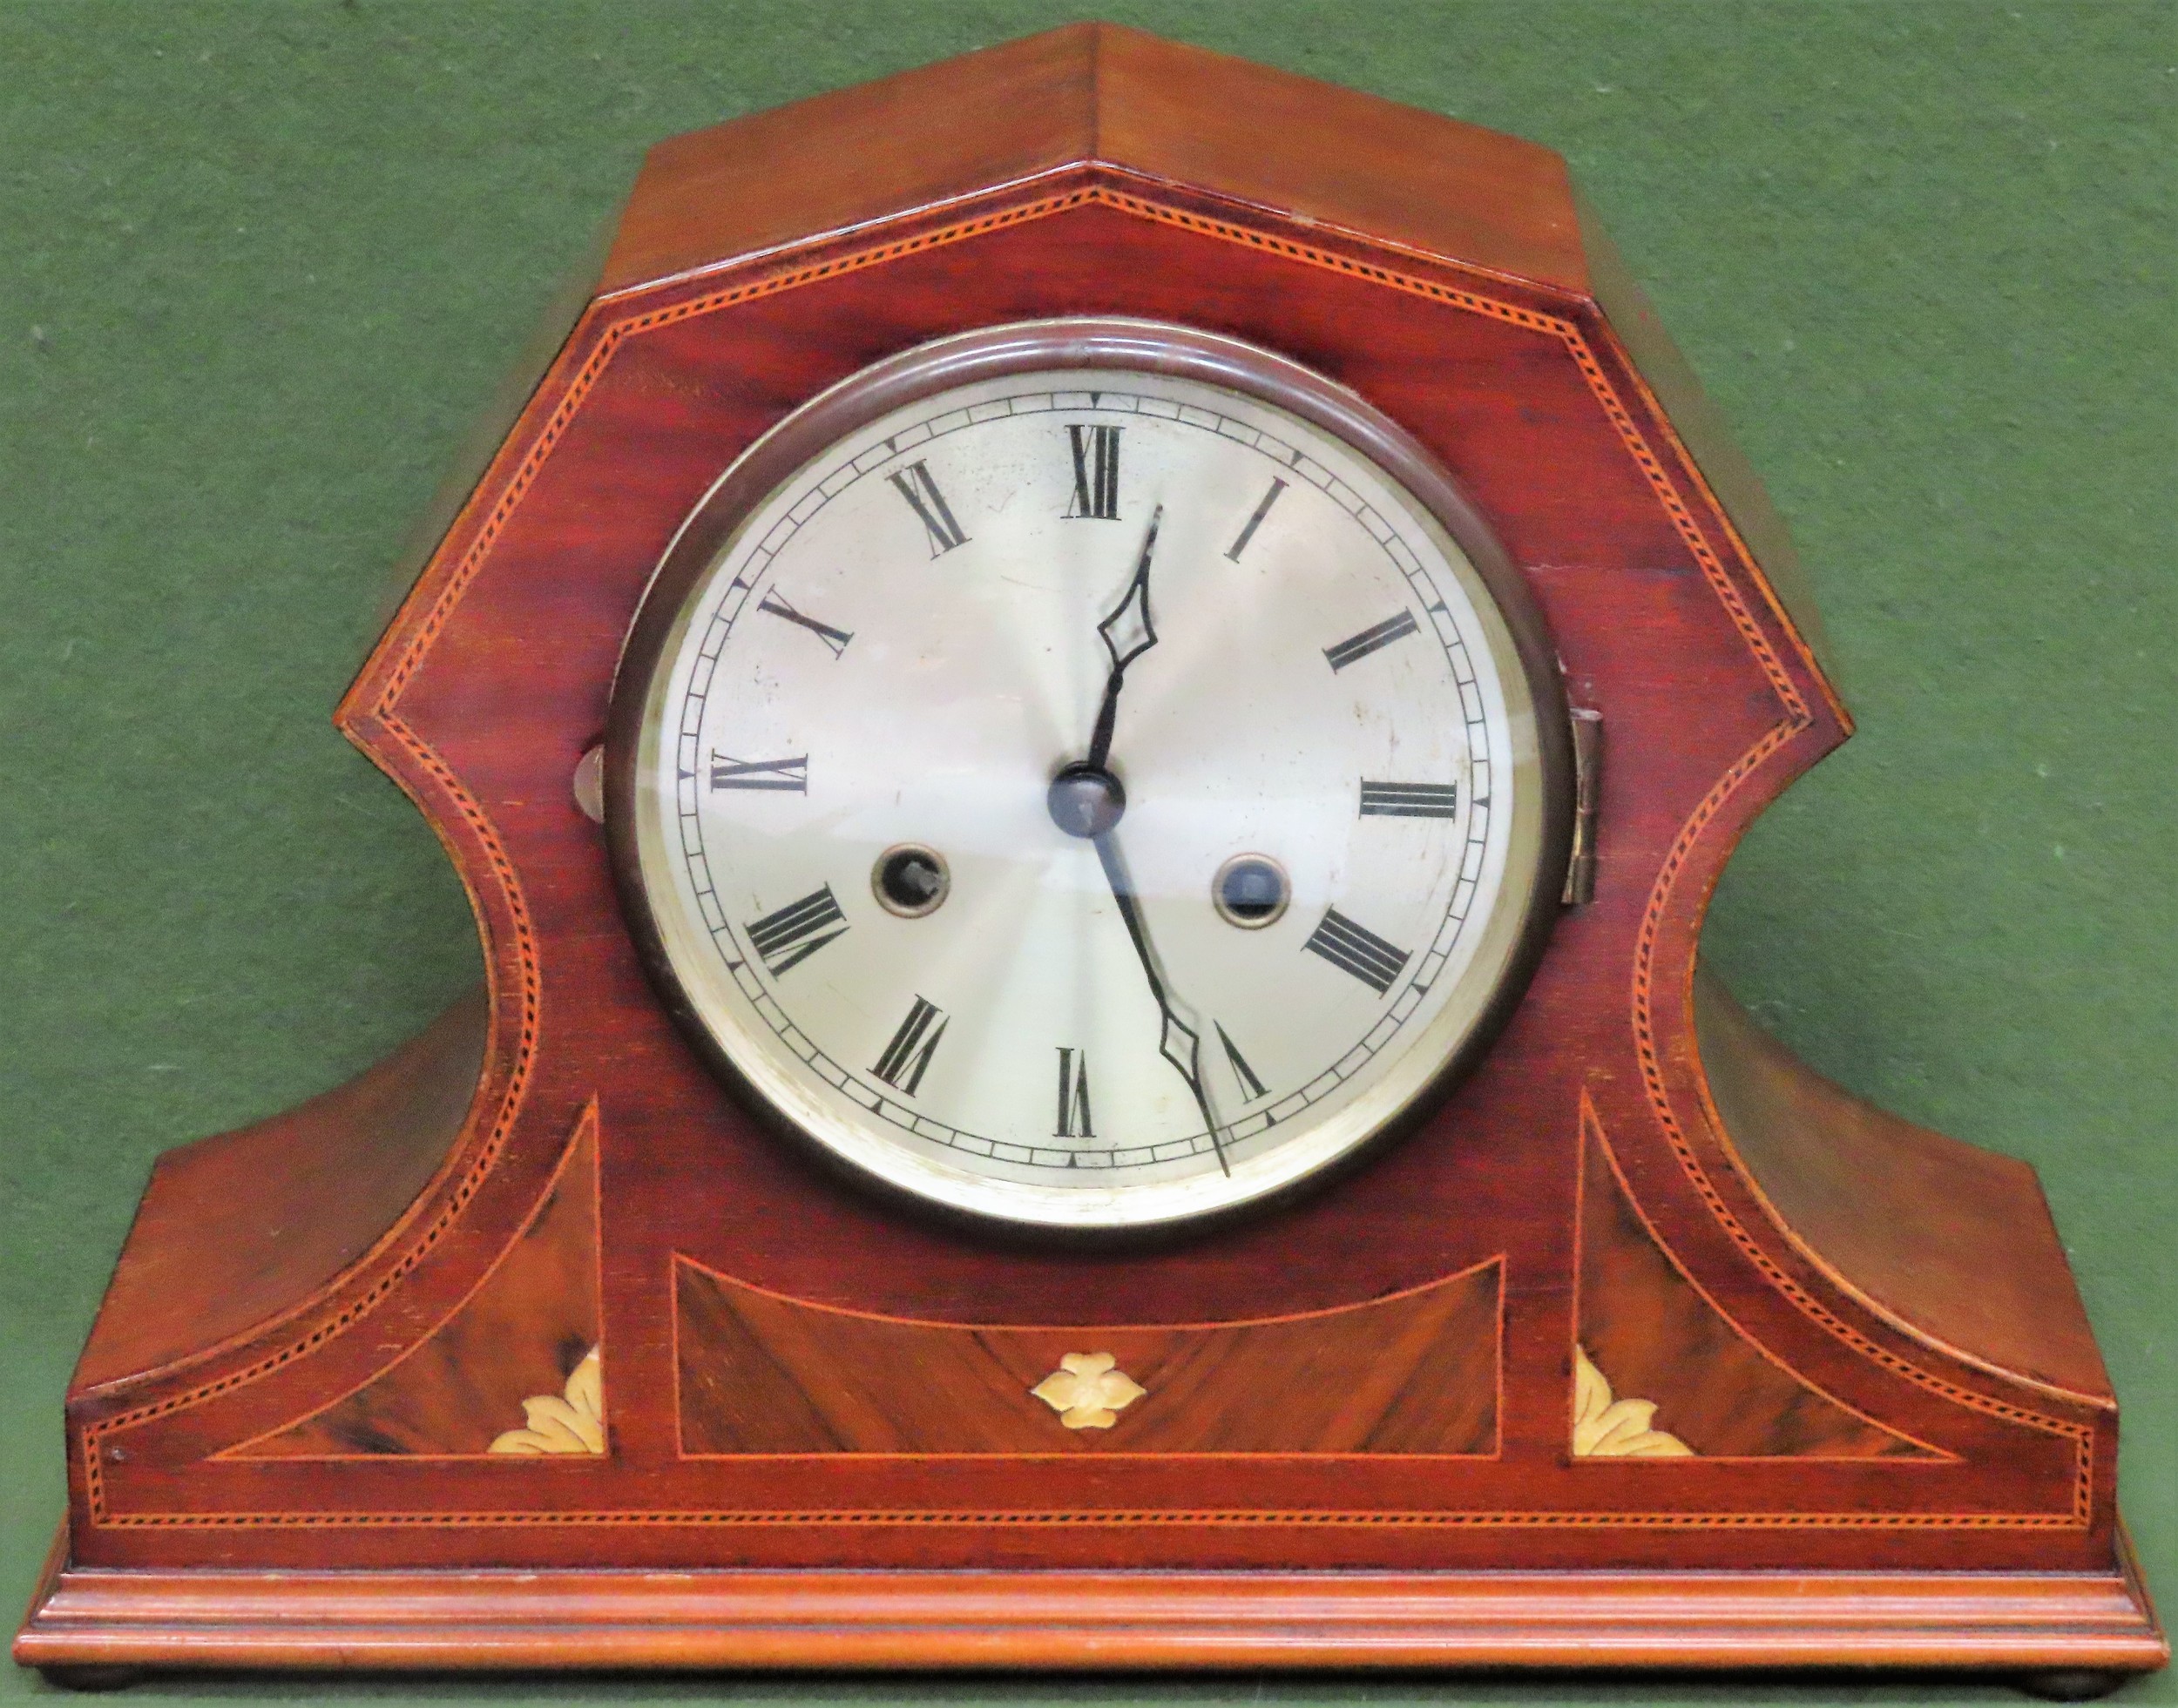 20th century Mahogany inlaid mantle clock, with silver coloured dial. App. 28cm H